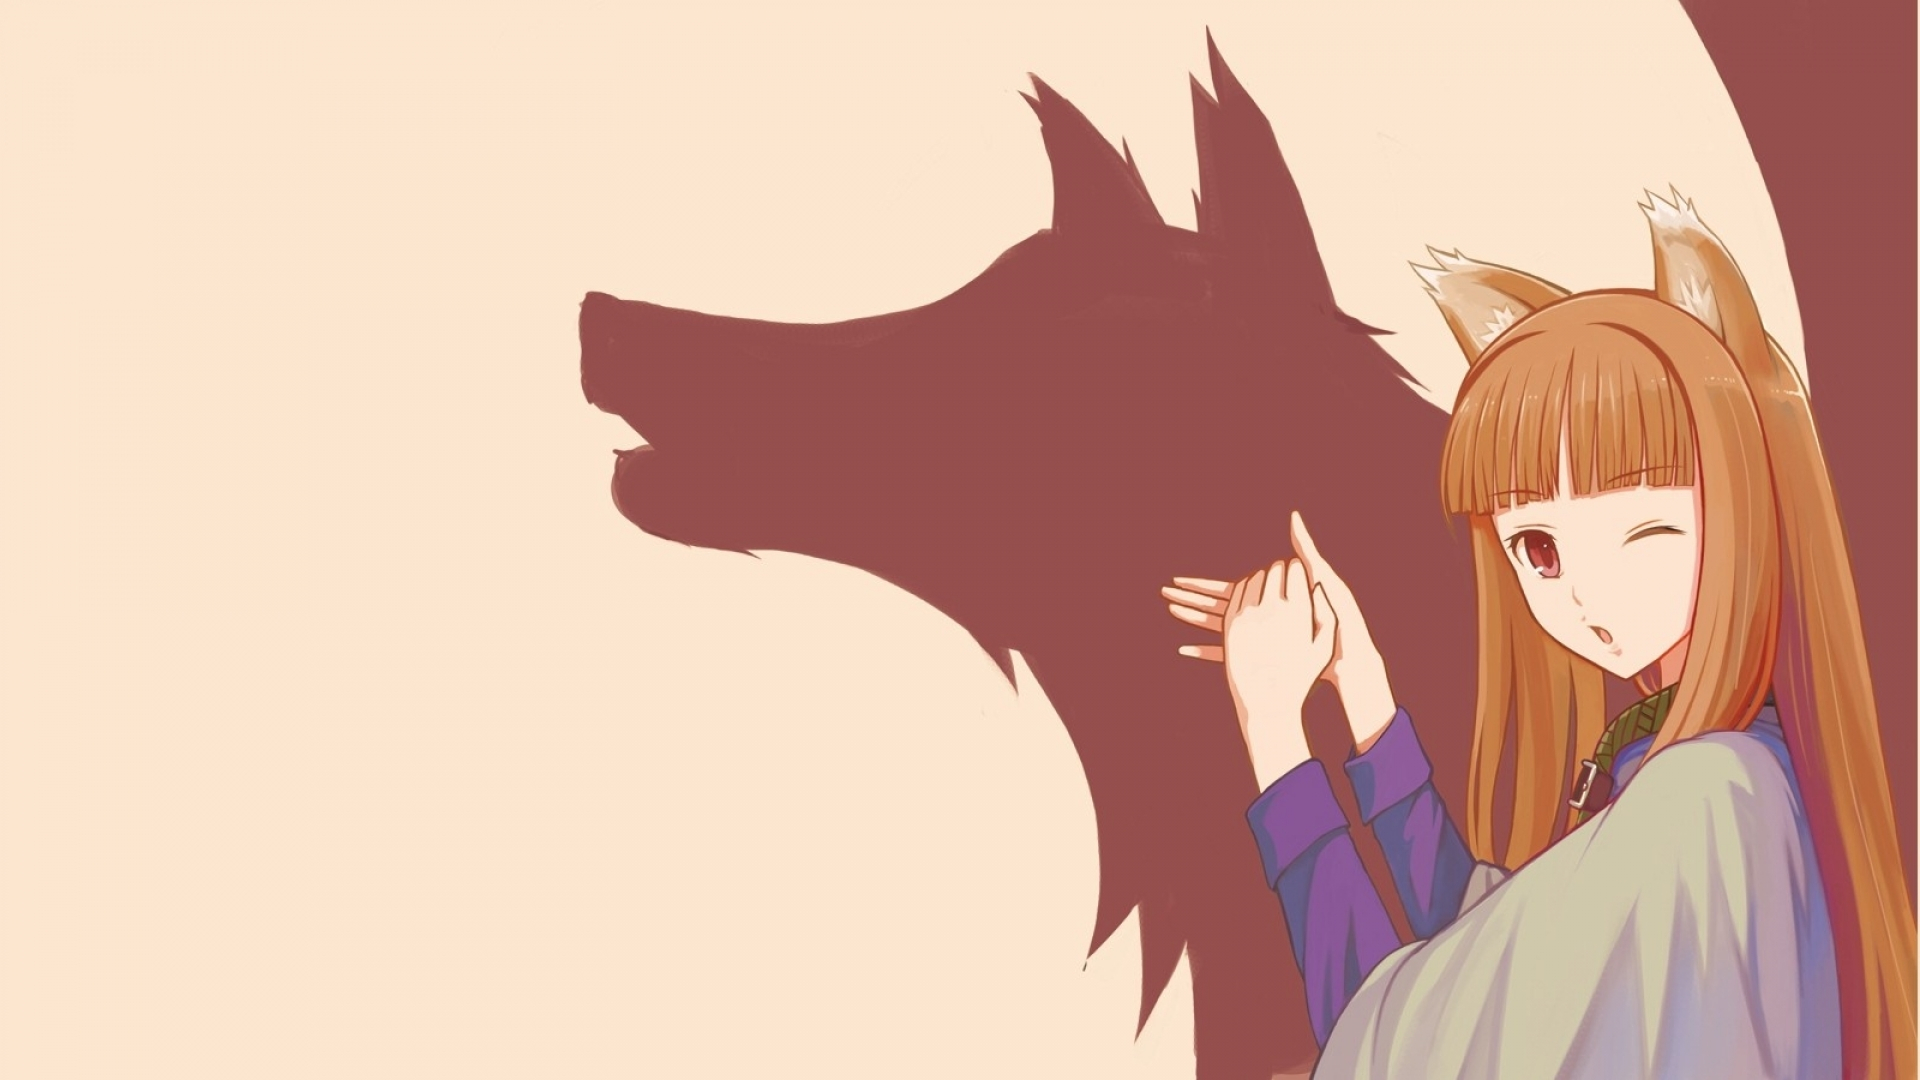 1920x1080 350+ Spice and Wolf HD Wallpapers and Backgrounds